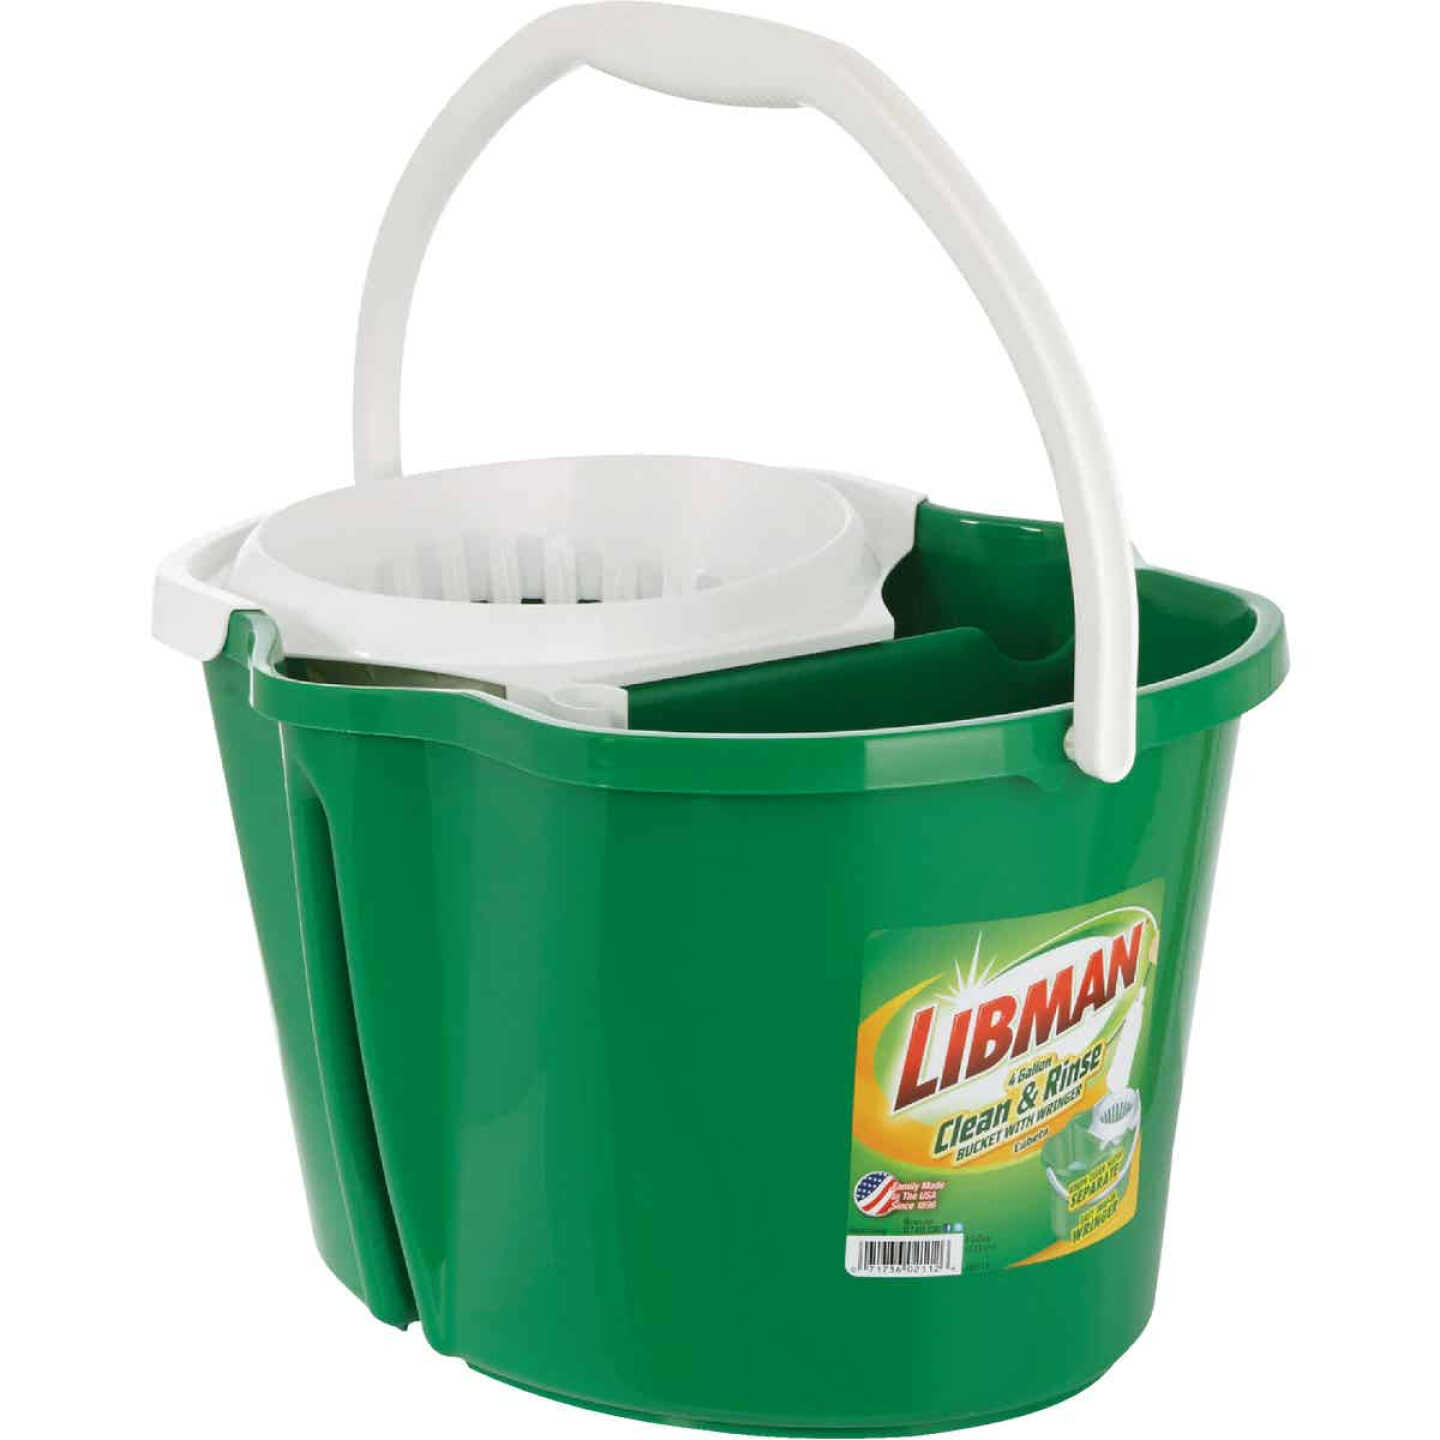 Libman 2-sided Clean and Rinse Wet Mop Bucket